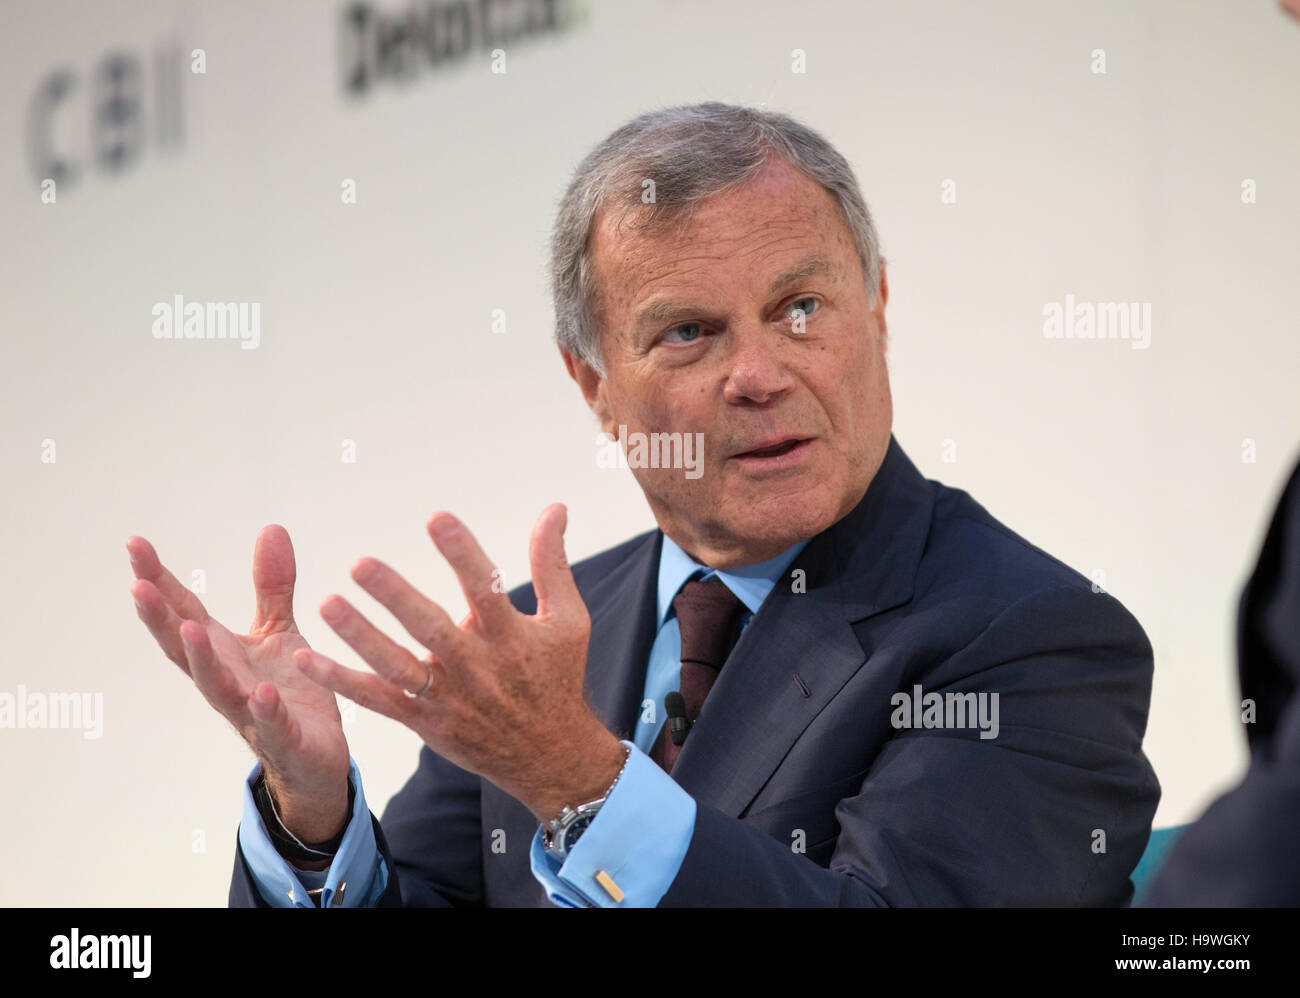 Martin Sorrell, chairman and CEO of WPP, the world's largest advertising company, speaks at the CBI conference in London 2016 Stock Photo